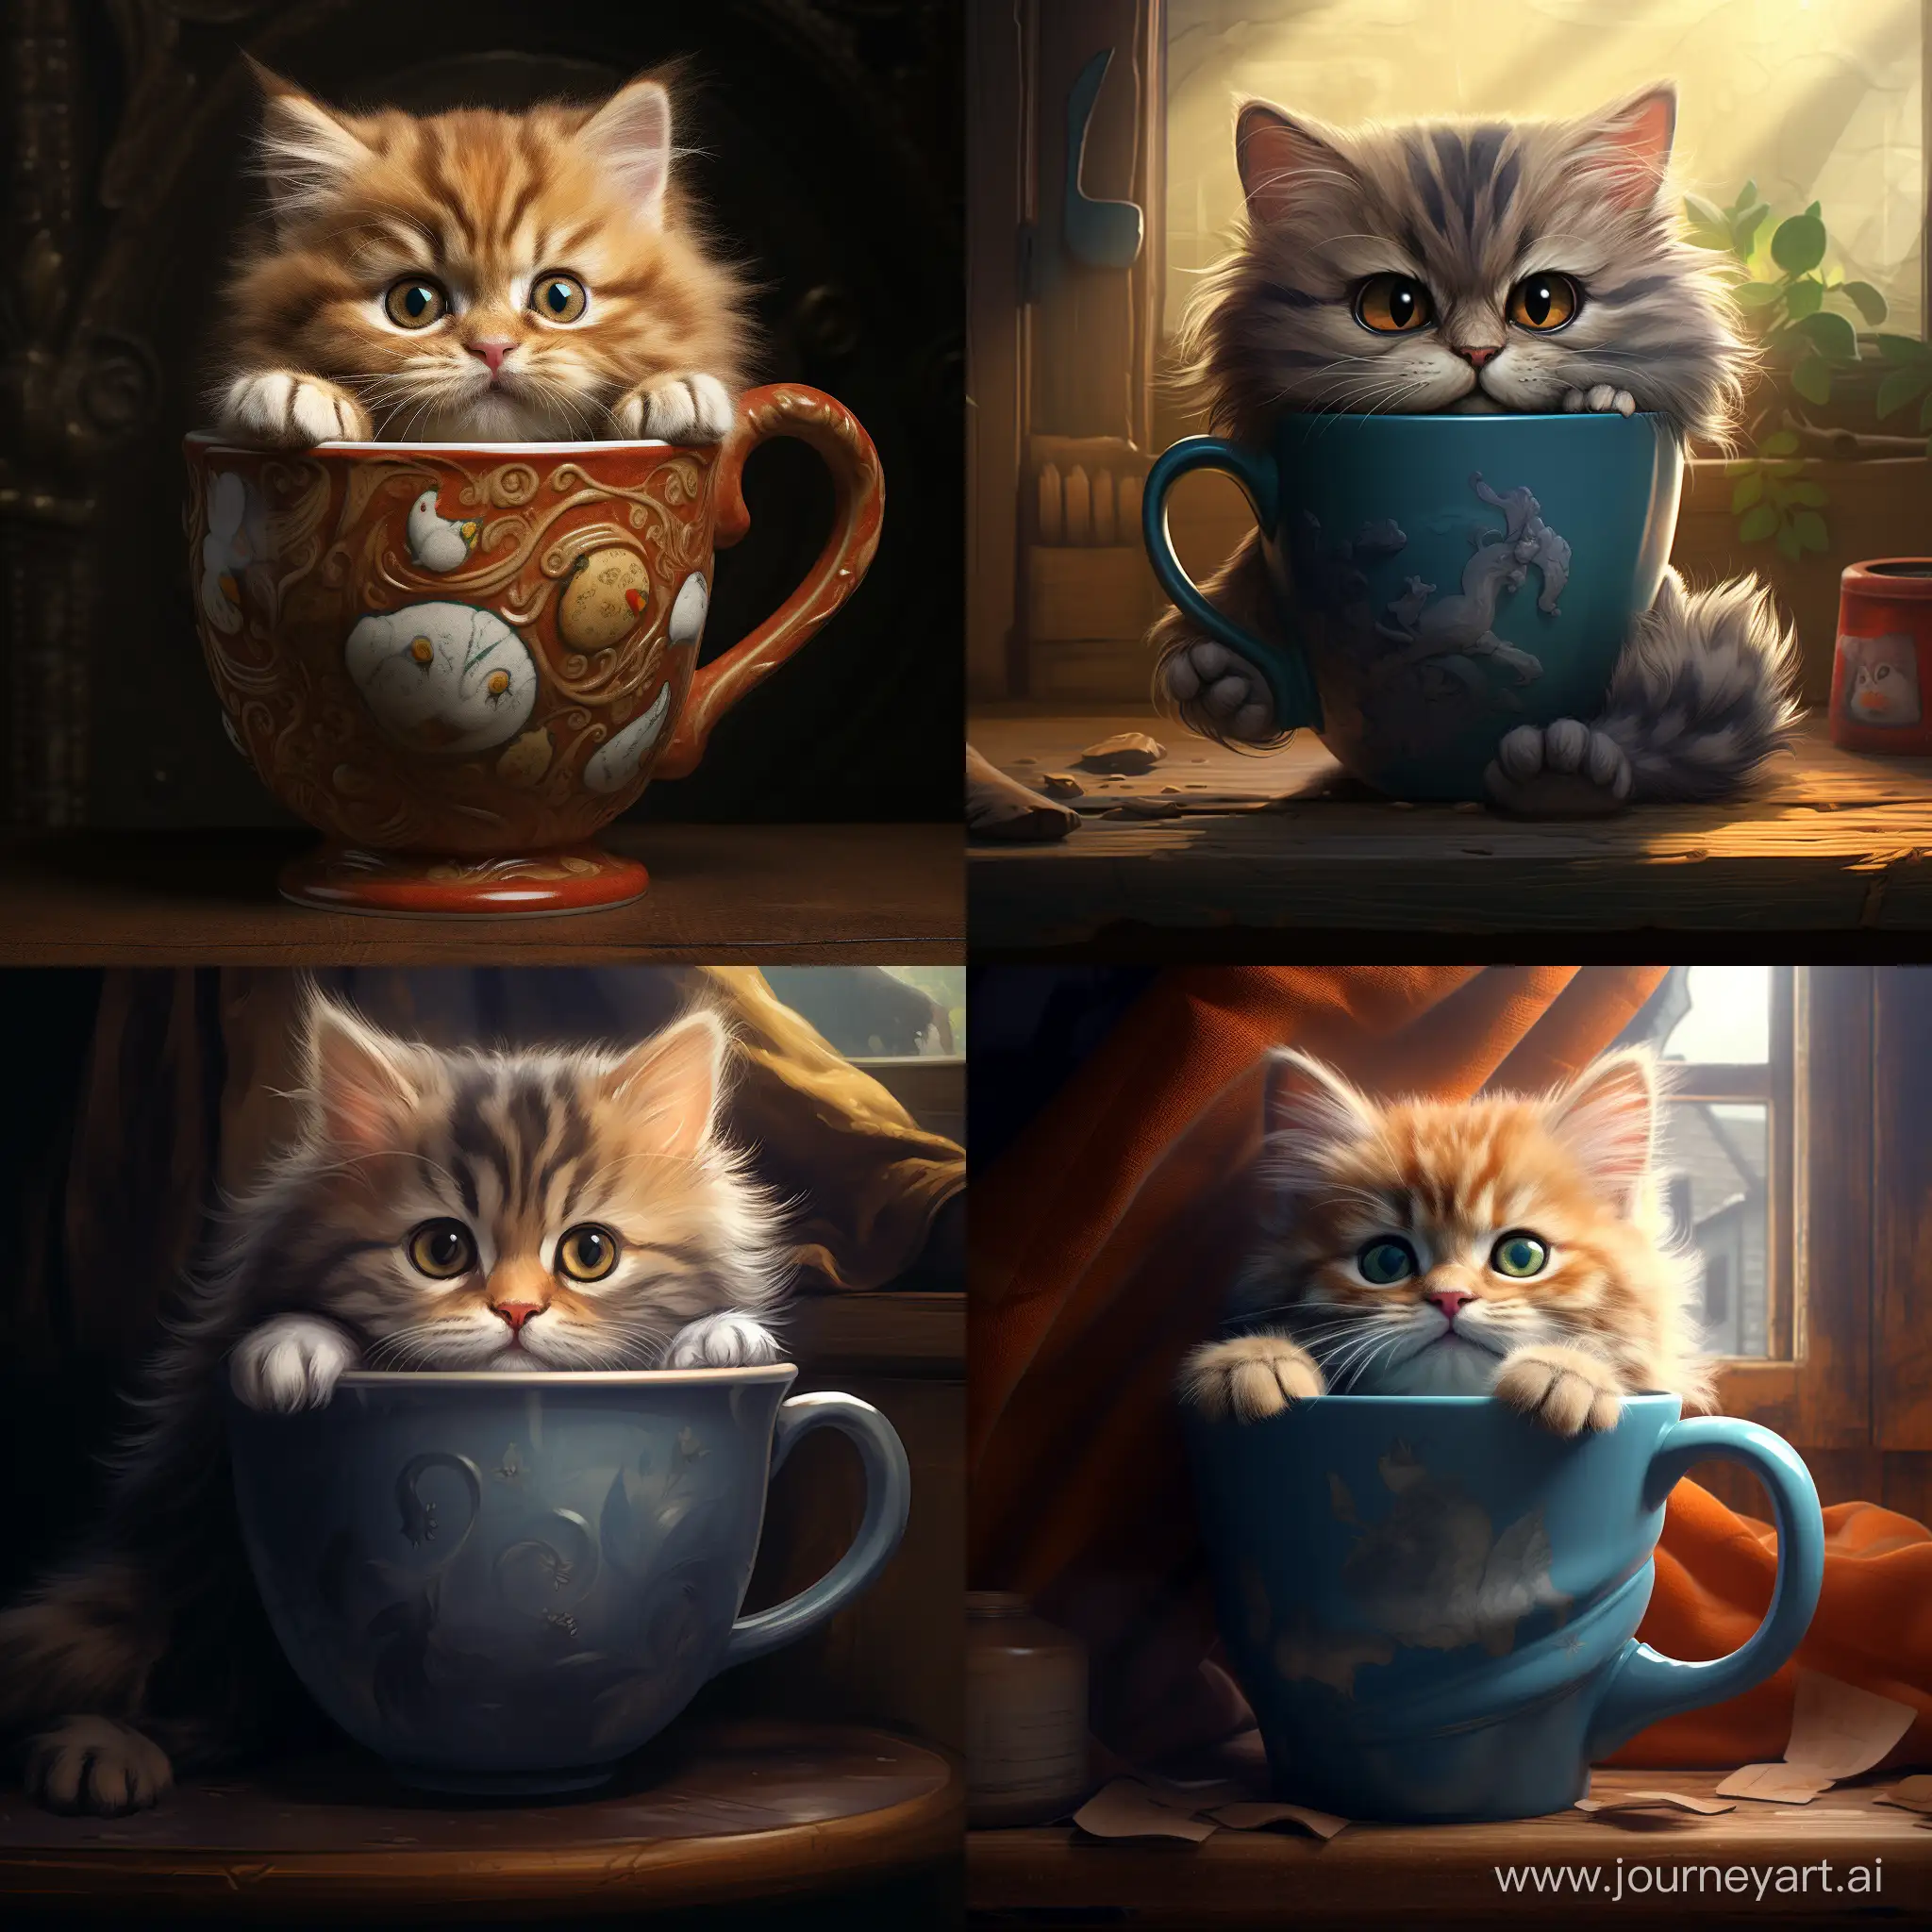 Adorable-Cat-with-a-Teacup-Charming-11-Aspect-Ratio-Image